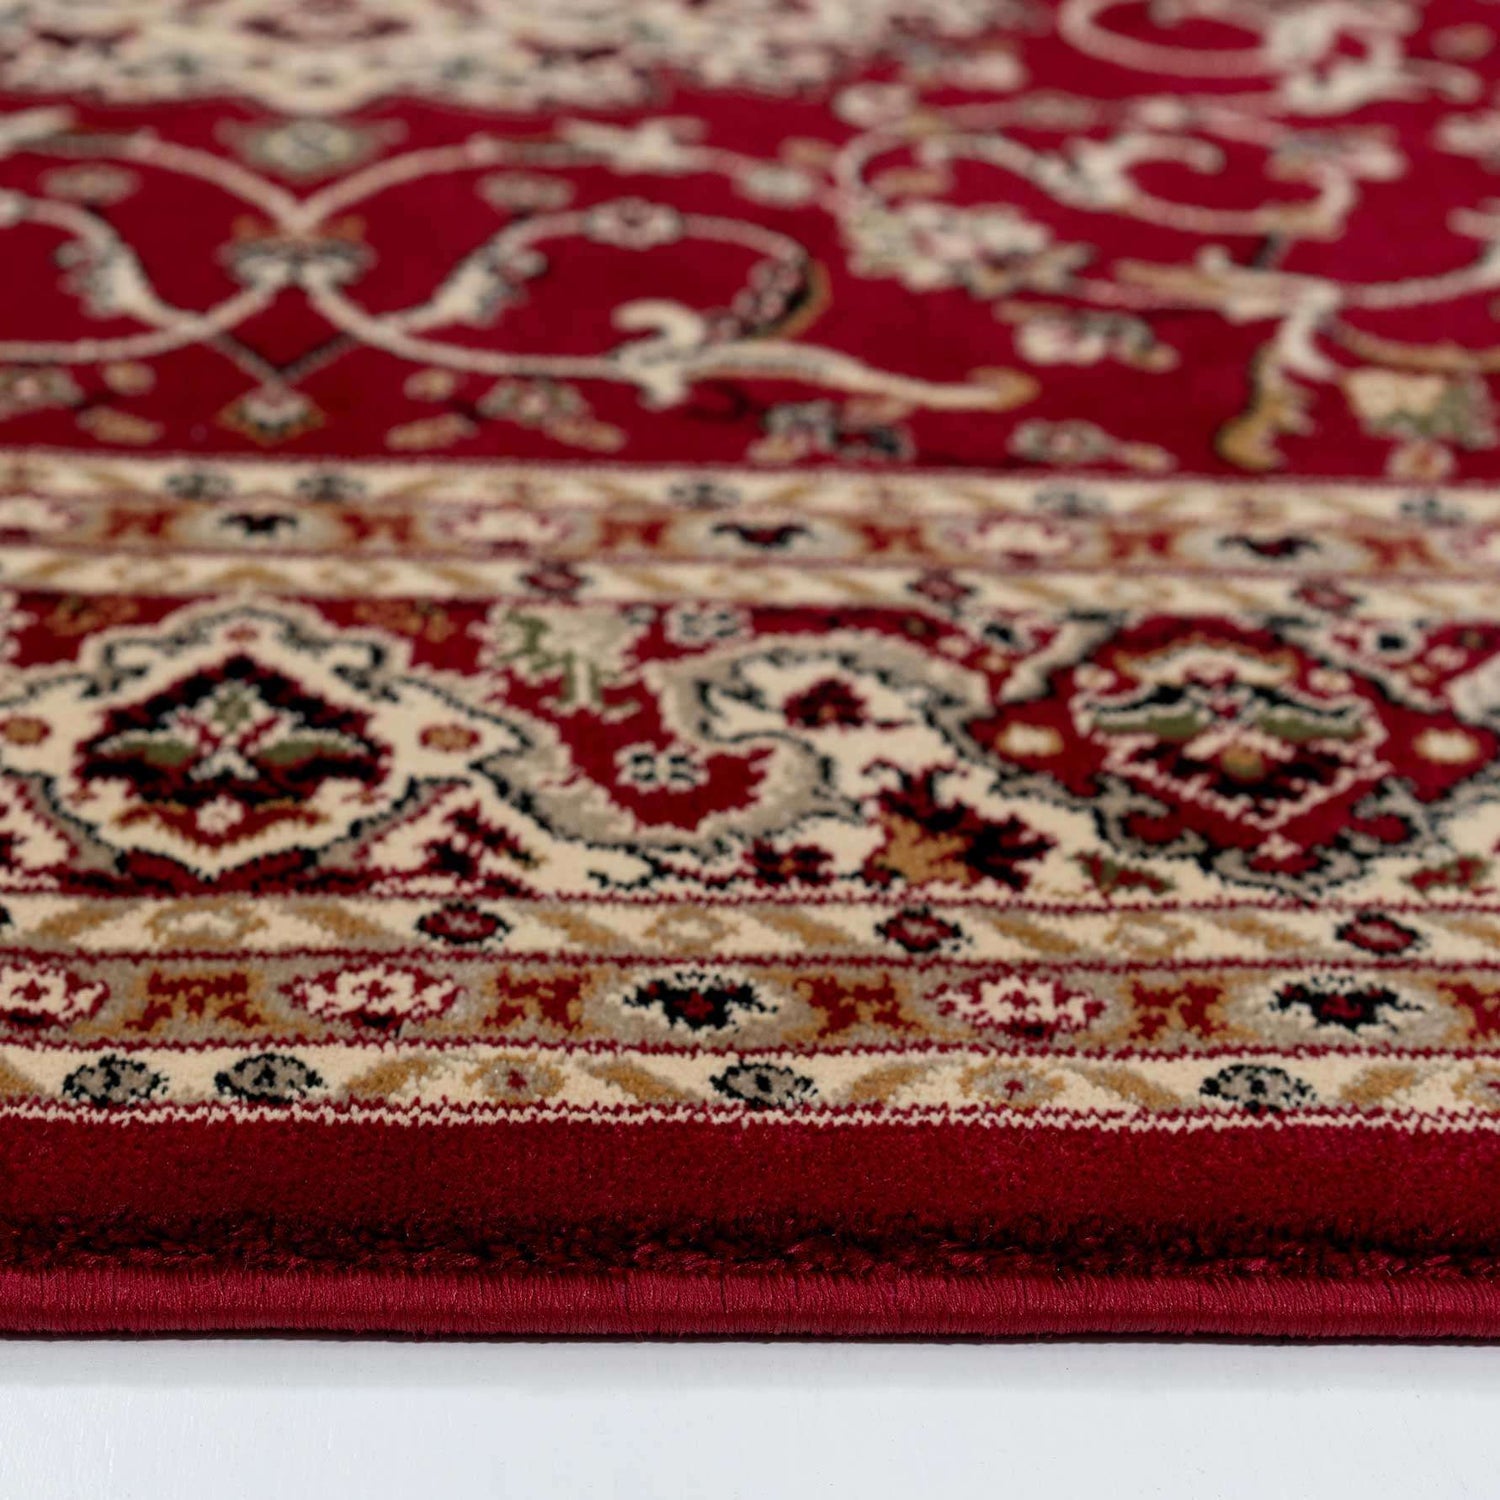 Traditional Red Bordered Round Rug